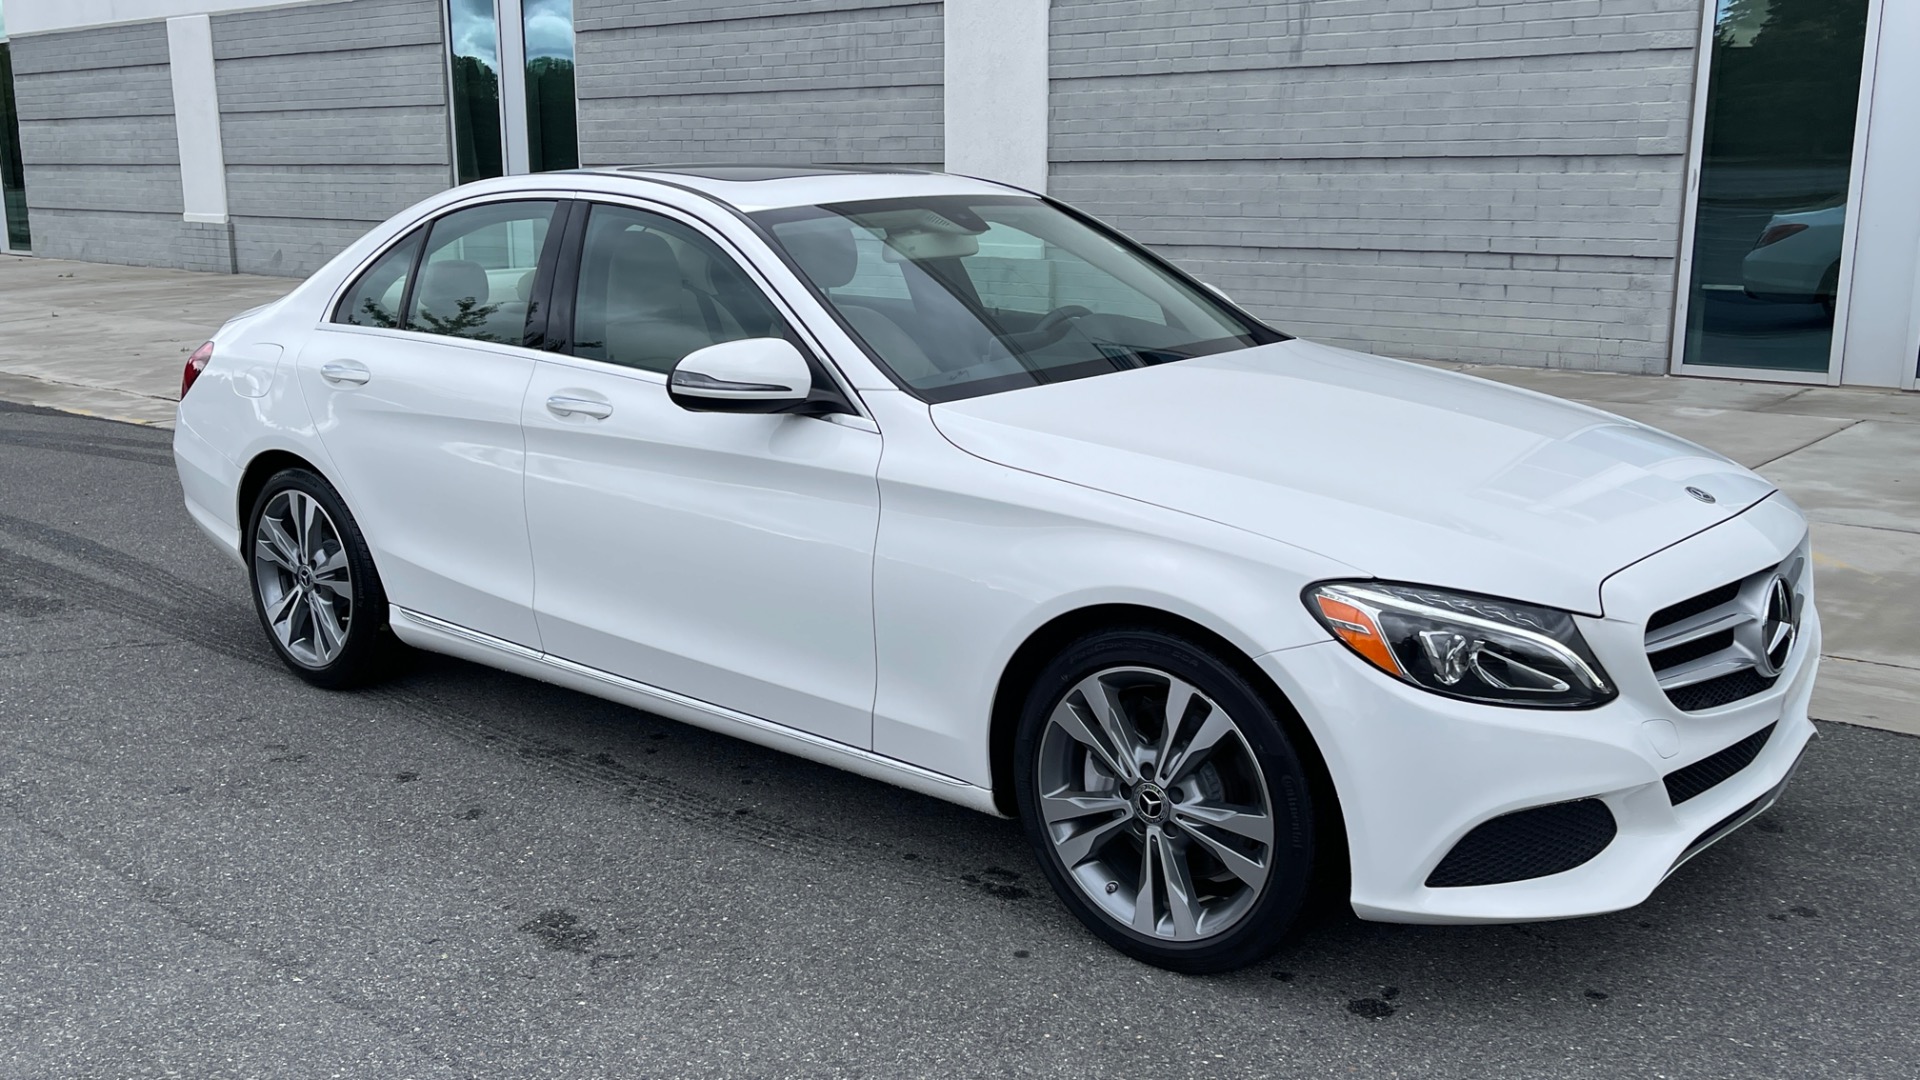 Used 2018 Mercedes-Benz C-Class C 300 / PREMIUM PACKAGE / 18IN WHEELS / HEATED FRONT SEATS / LED HEADLIGHTS for sale Sold at Formula Imports in Charlotte NC 28227 7